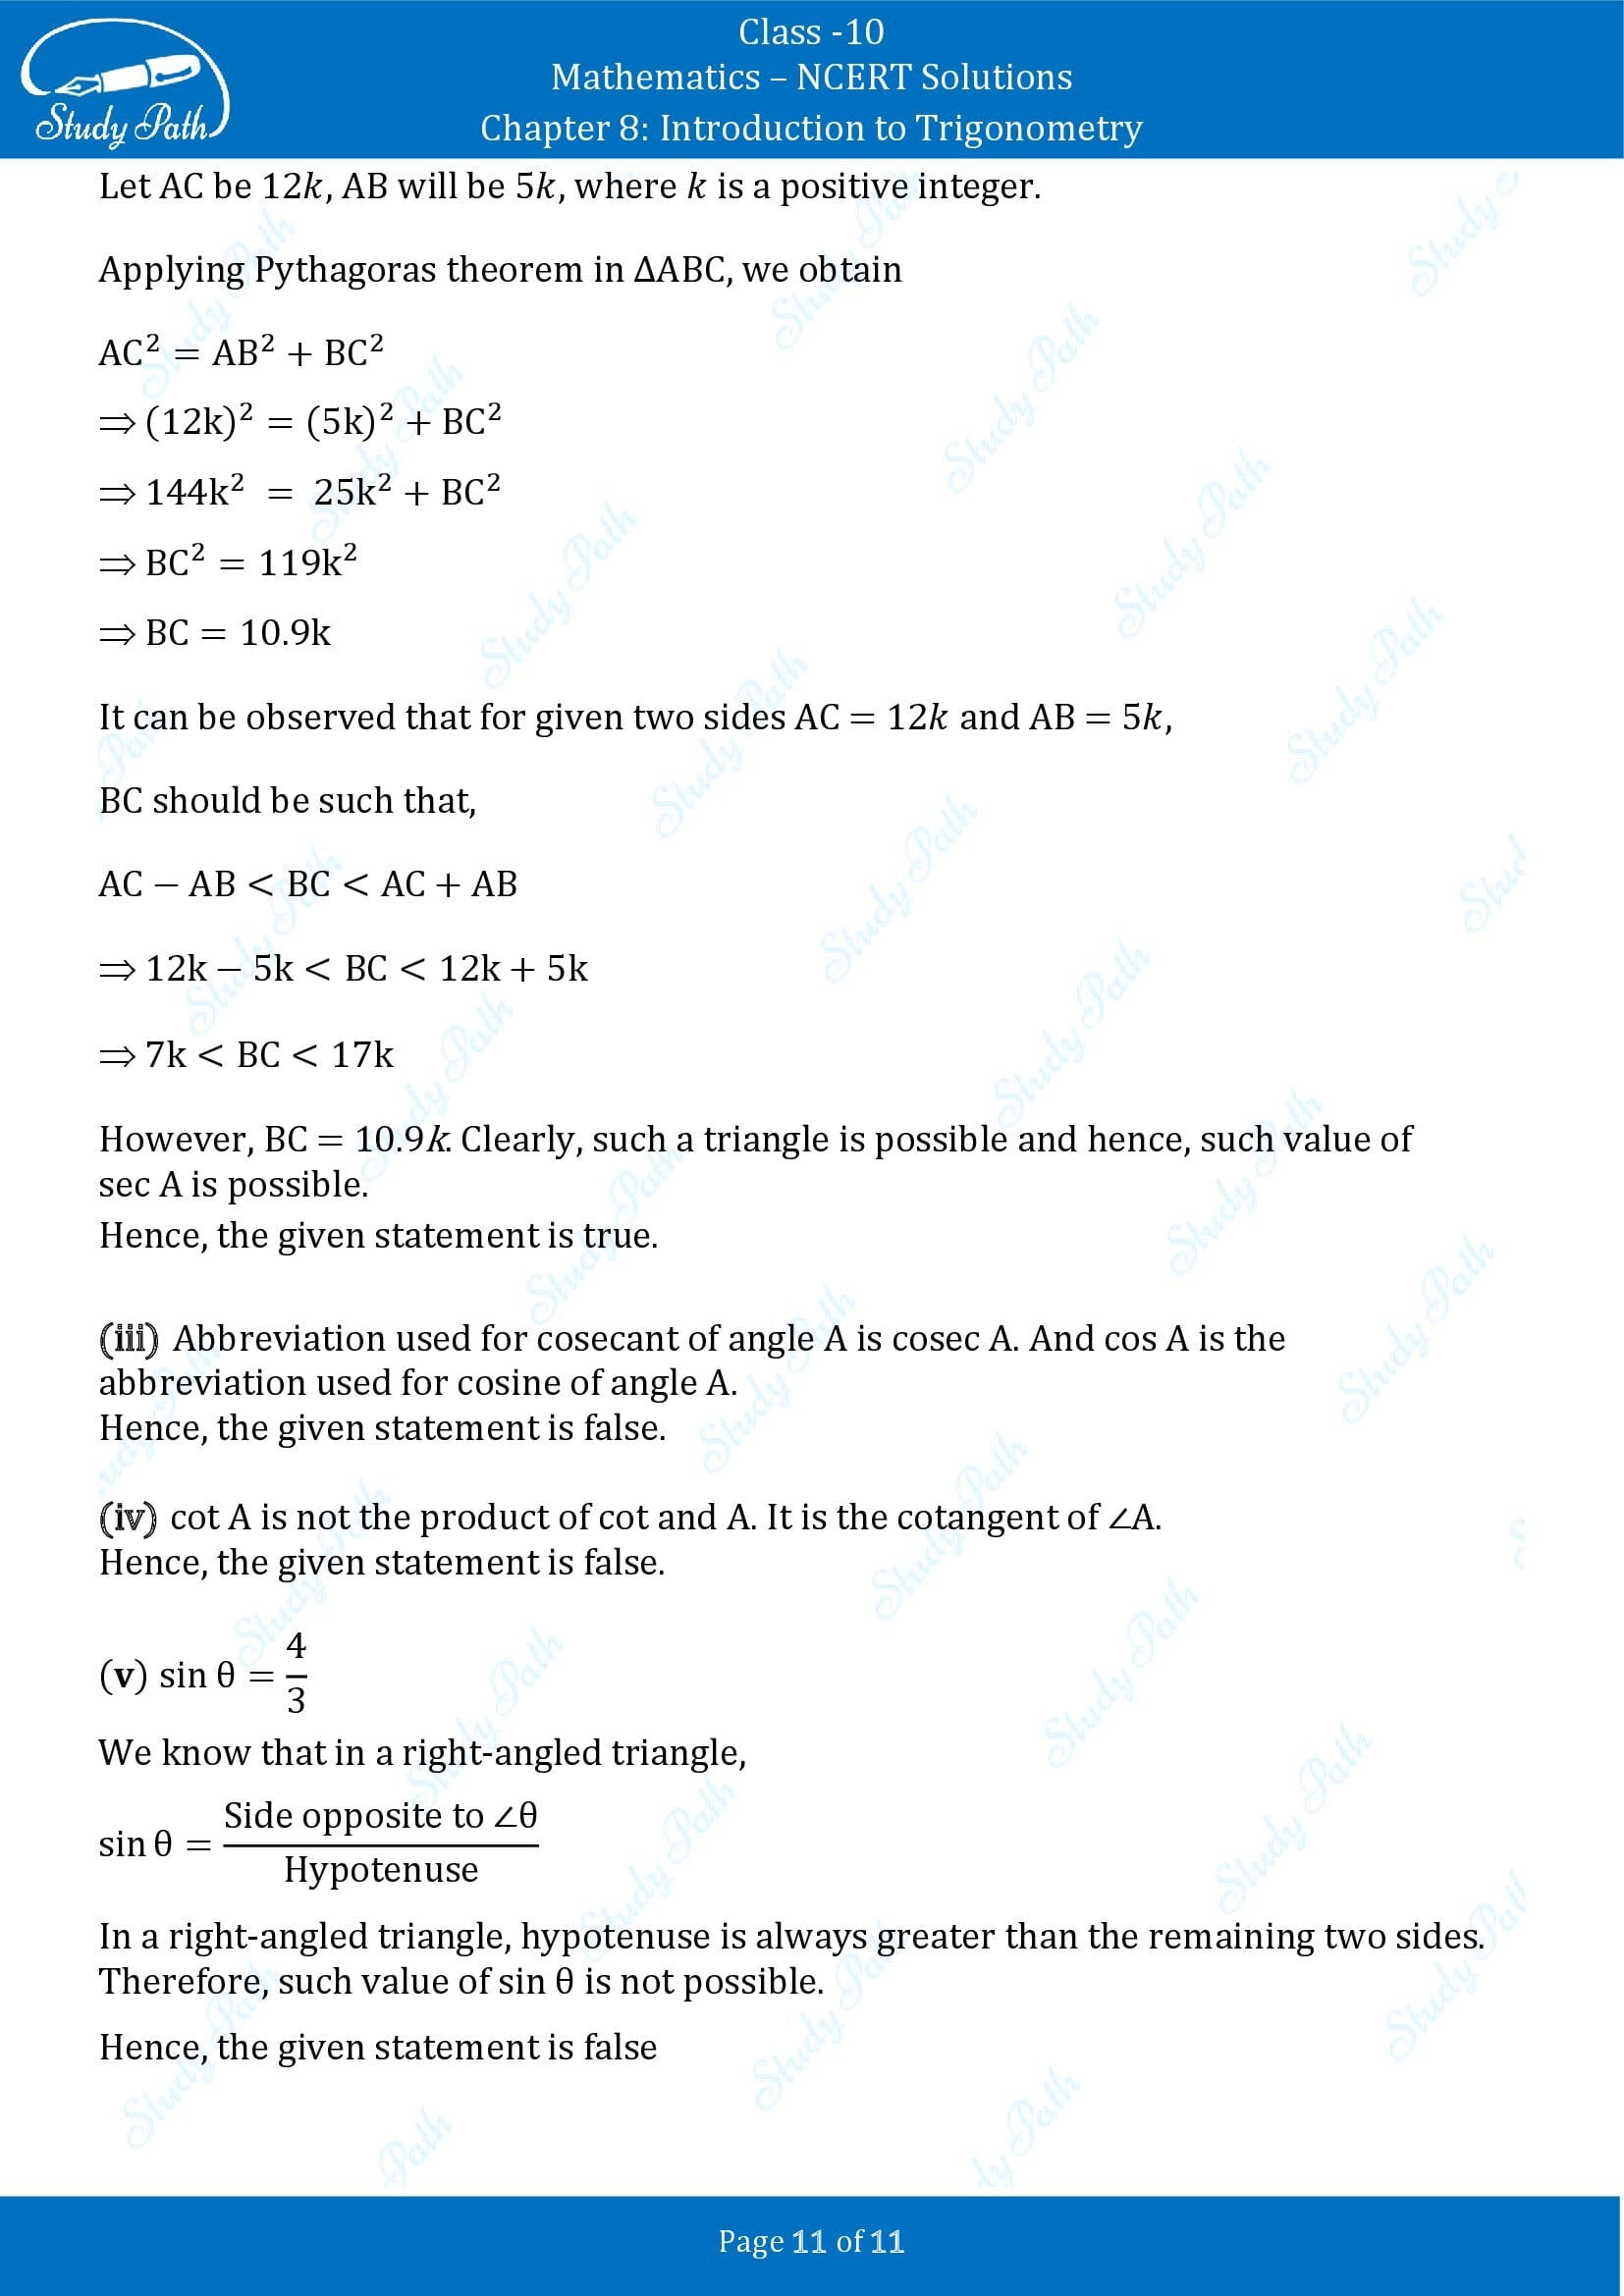 NCERT Solutions for Class 10 Maths Chapter 8 Introduction to Trigonometry Exercise 8.1 00011